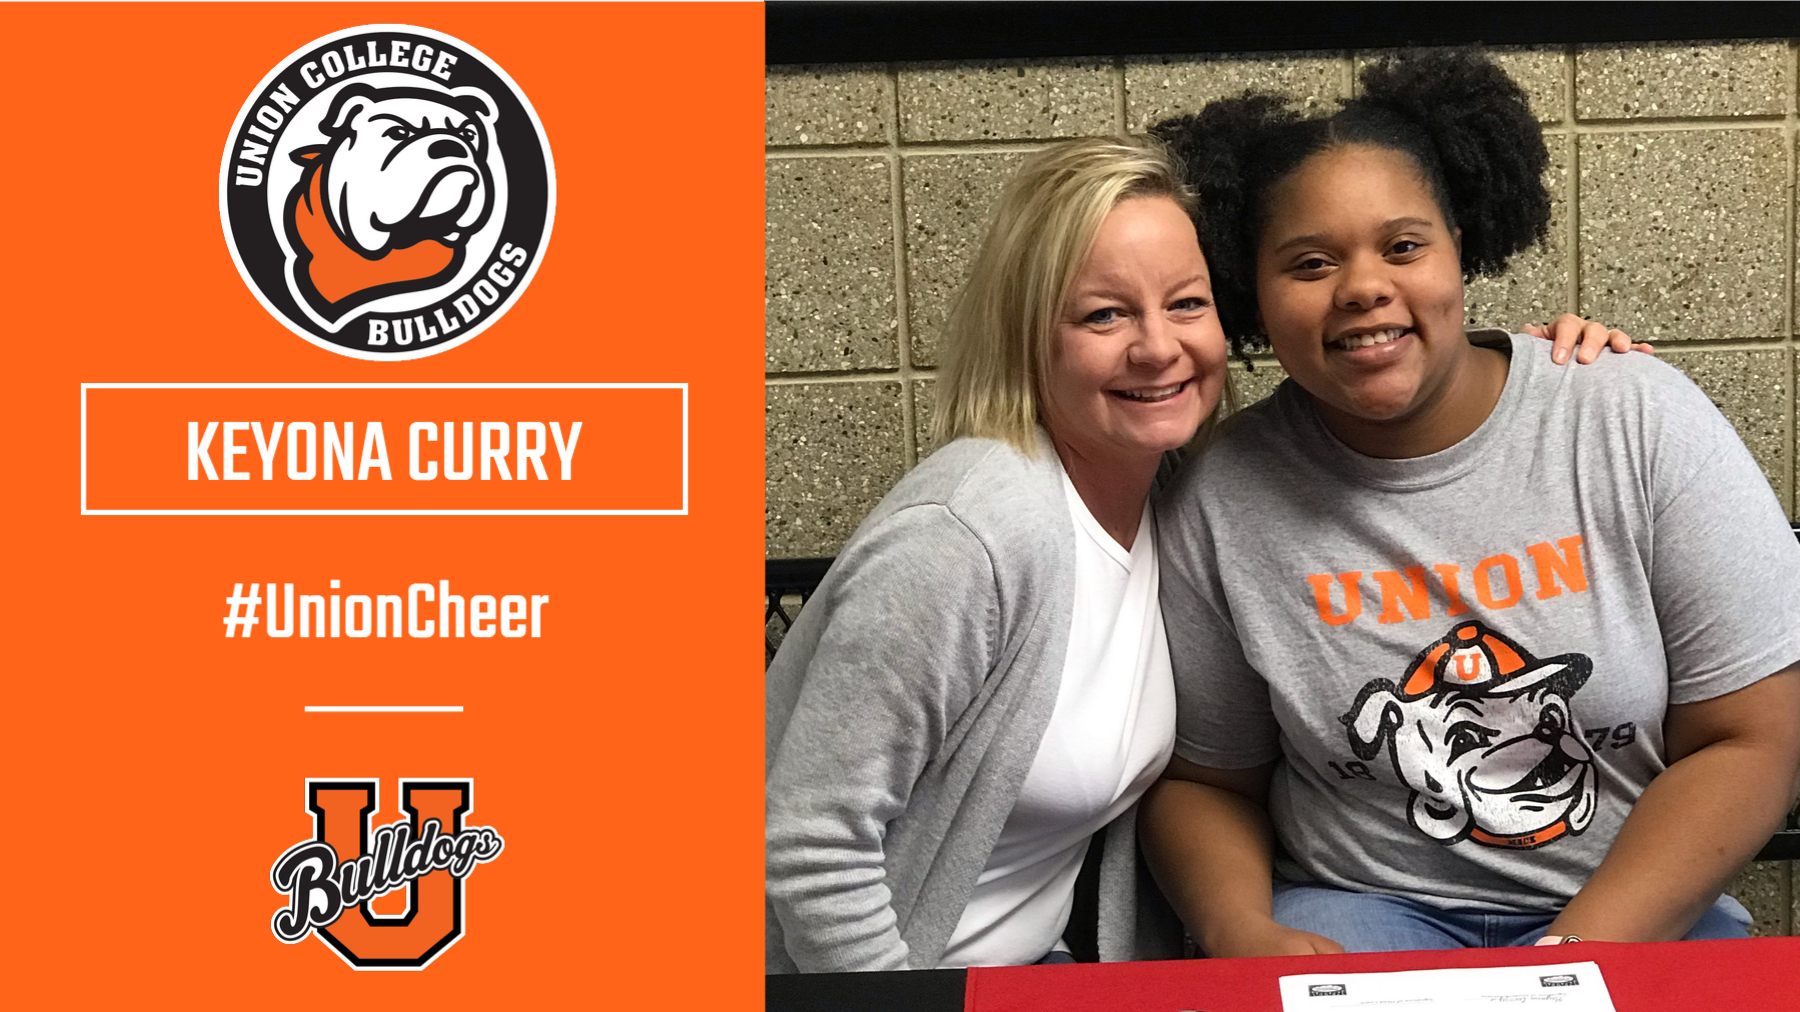 Union Cheer Welcomes Curry to the 2019-20 Roster